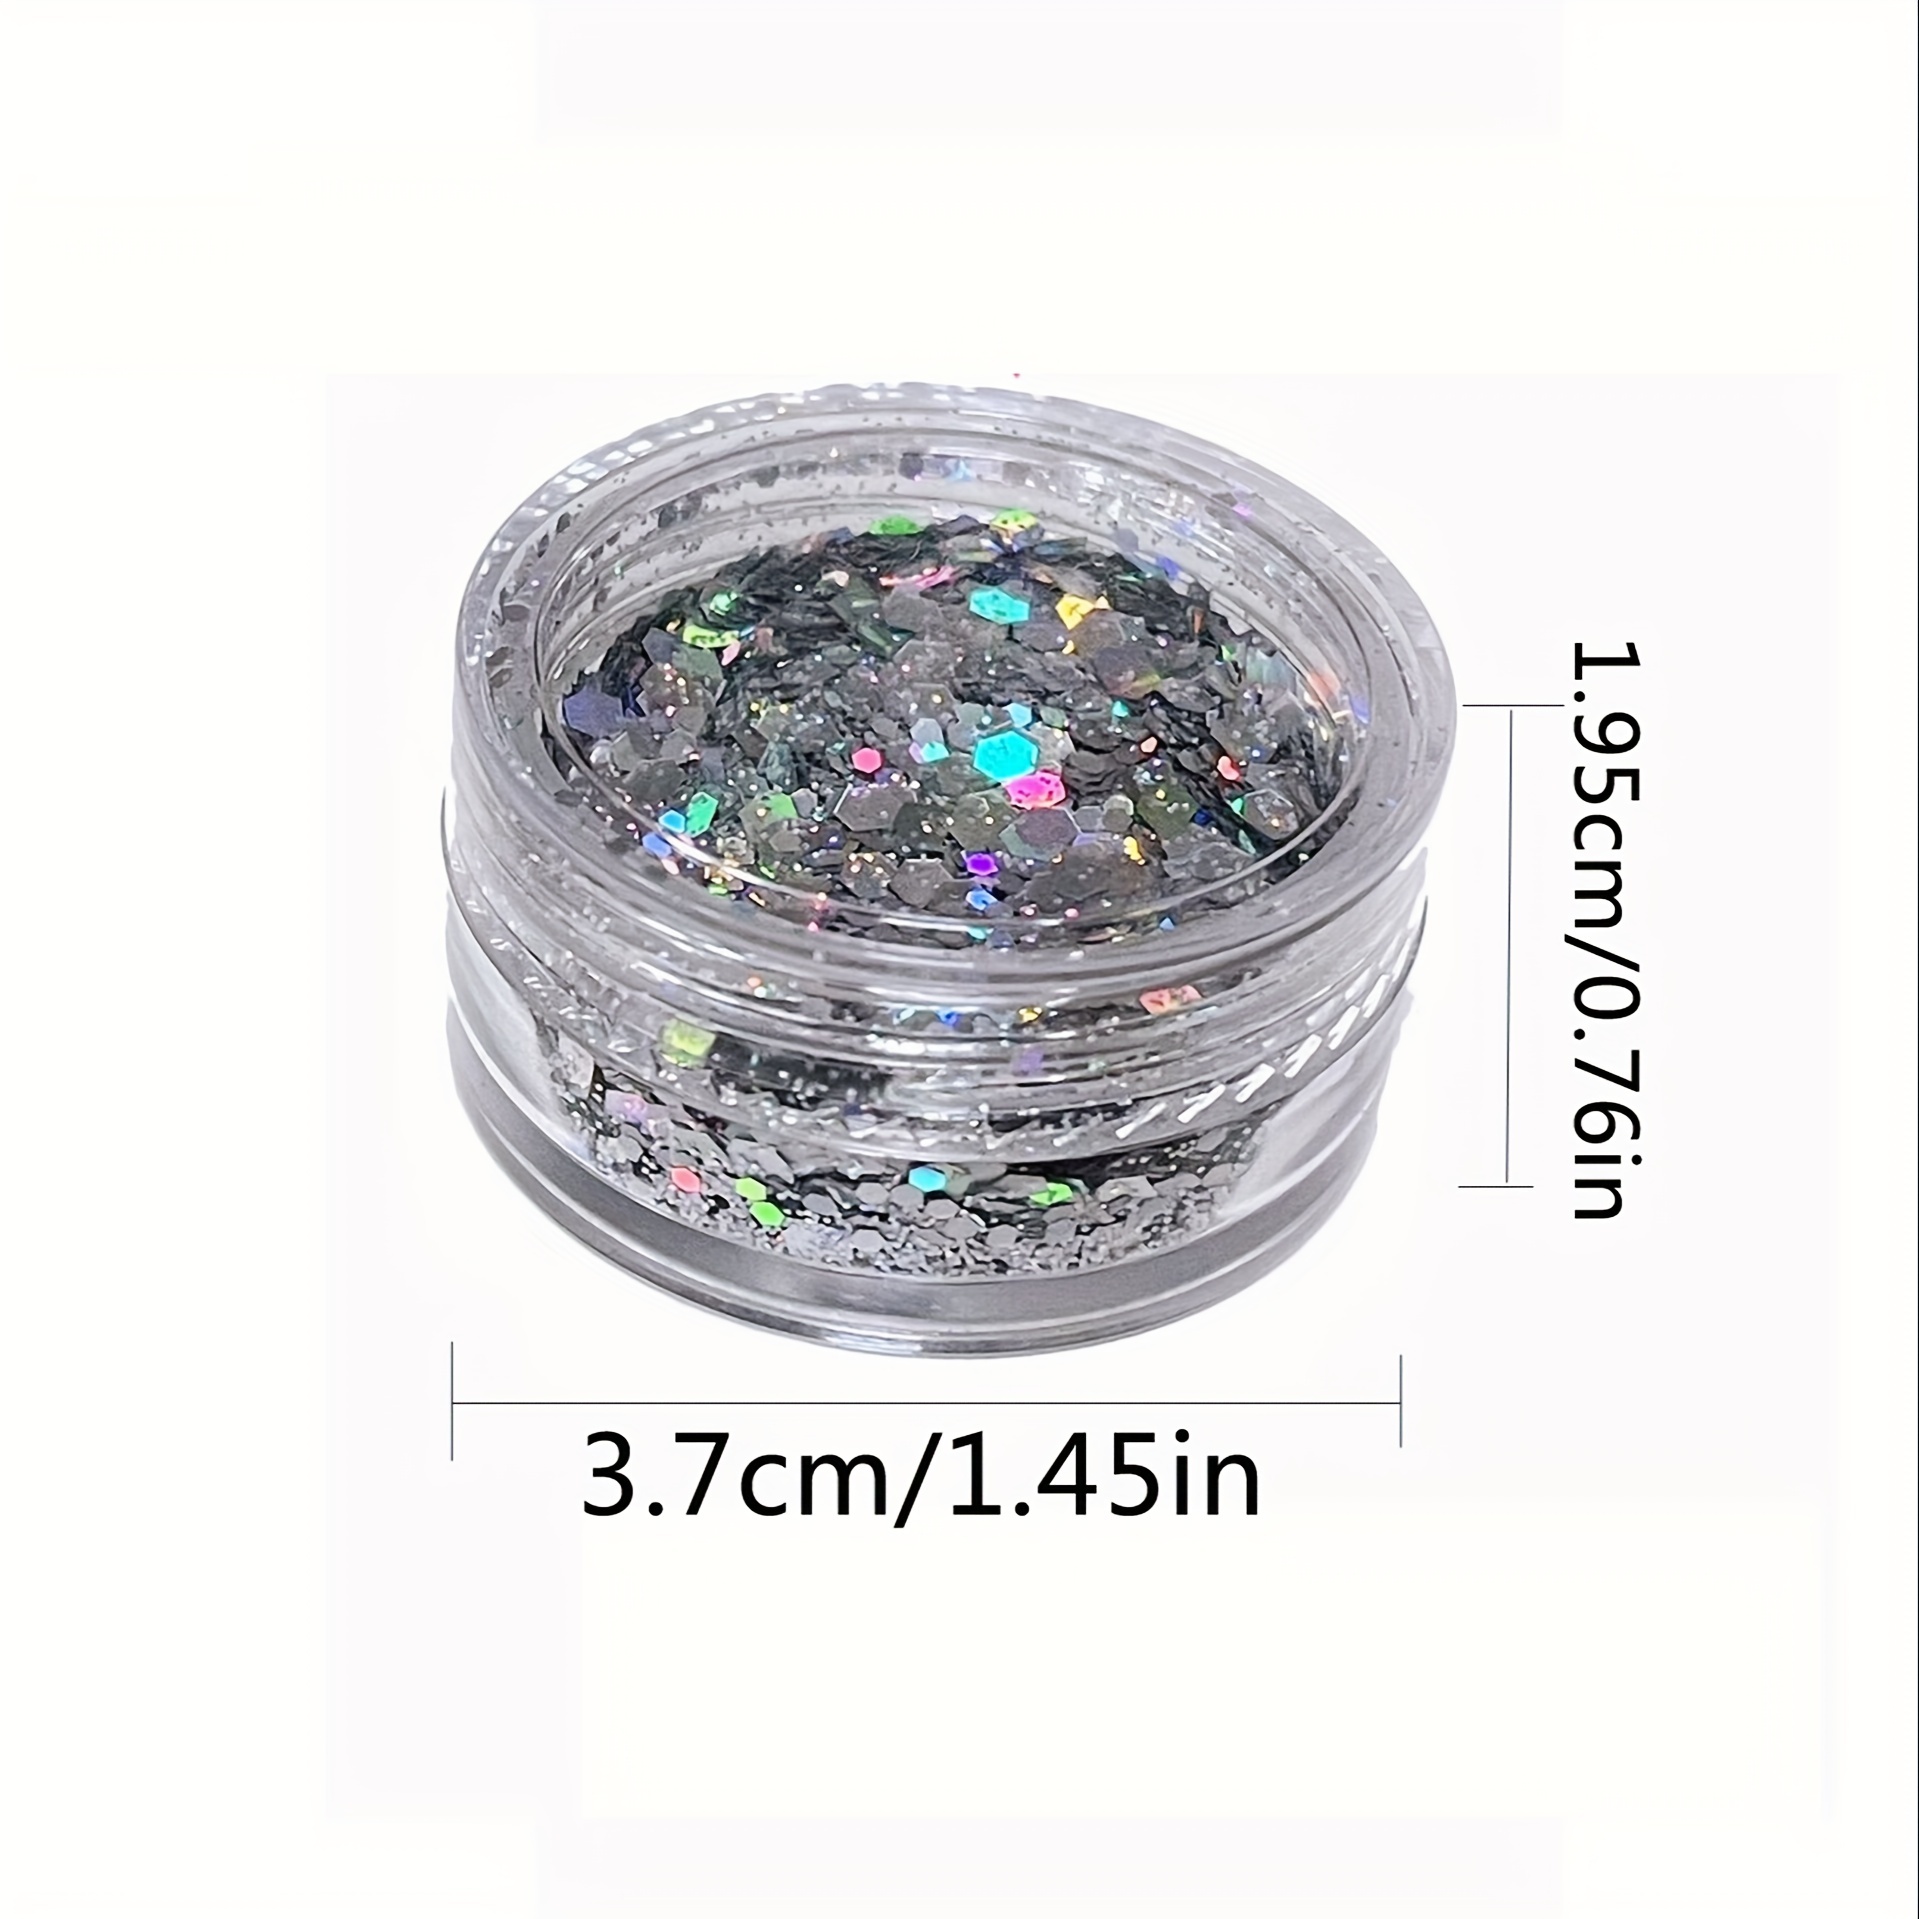 Barb Chunky Makeup Glitter – The Eight Co